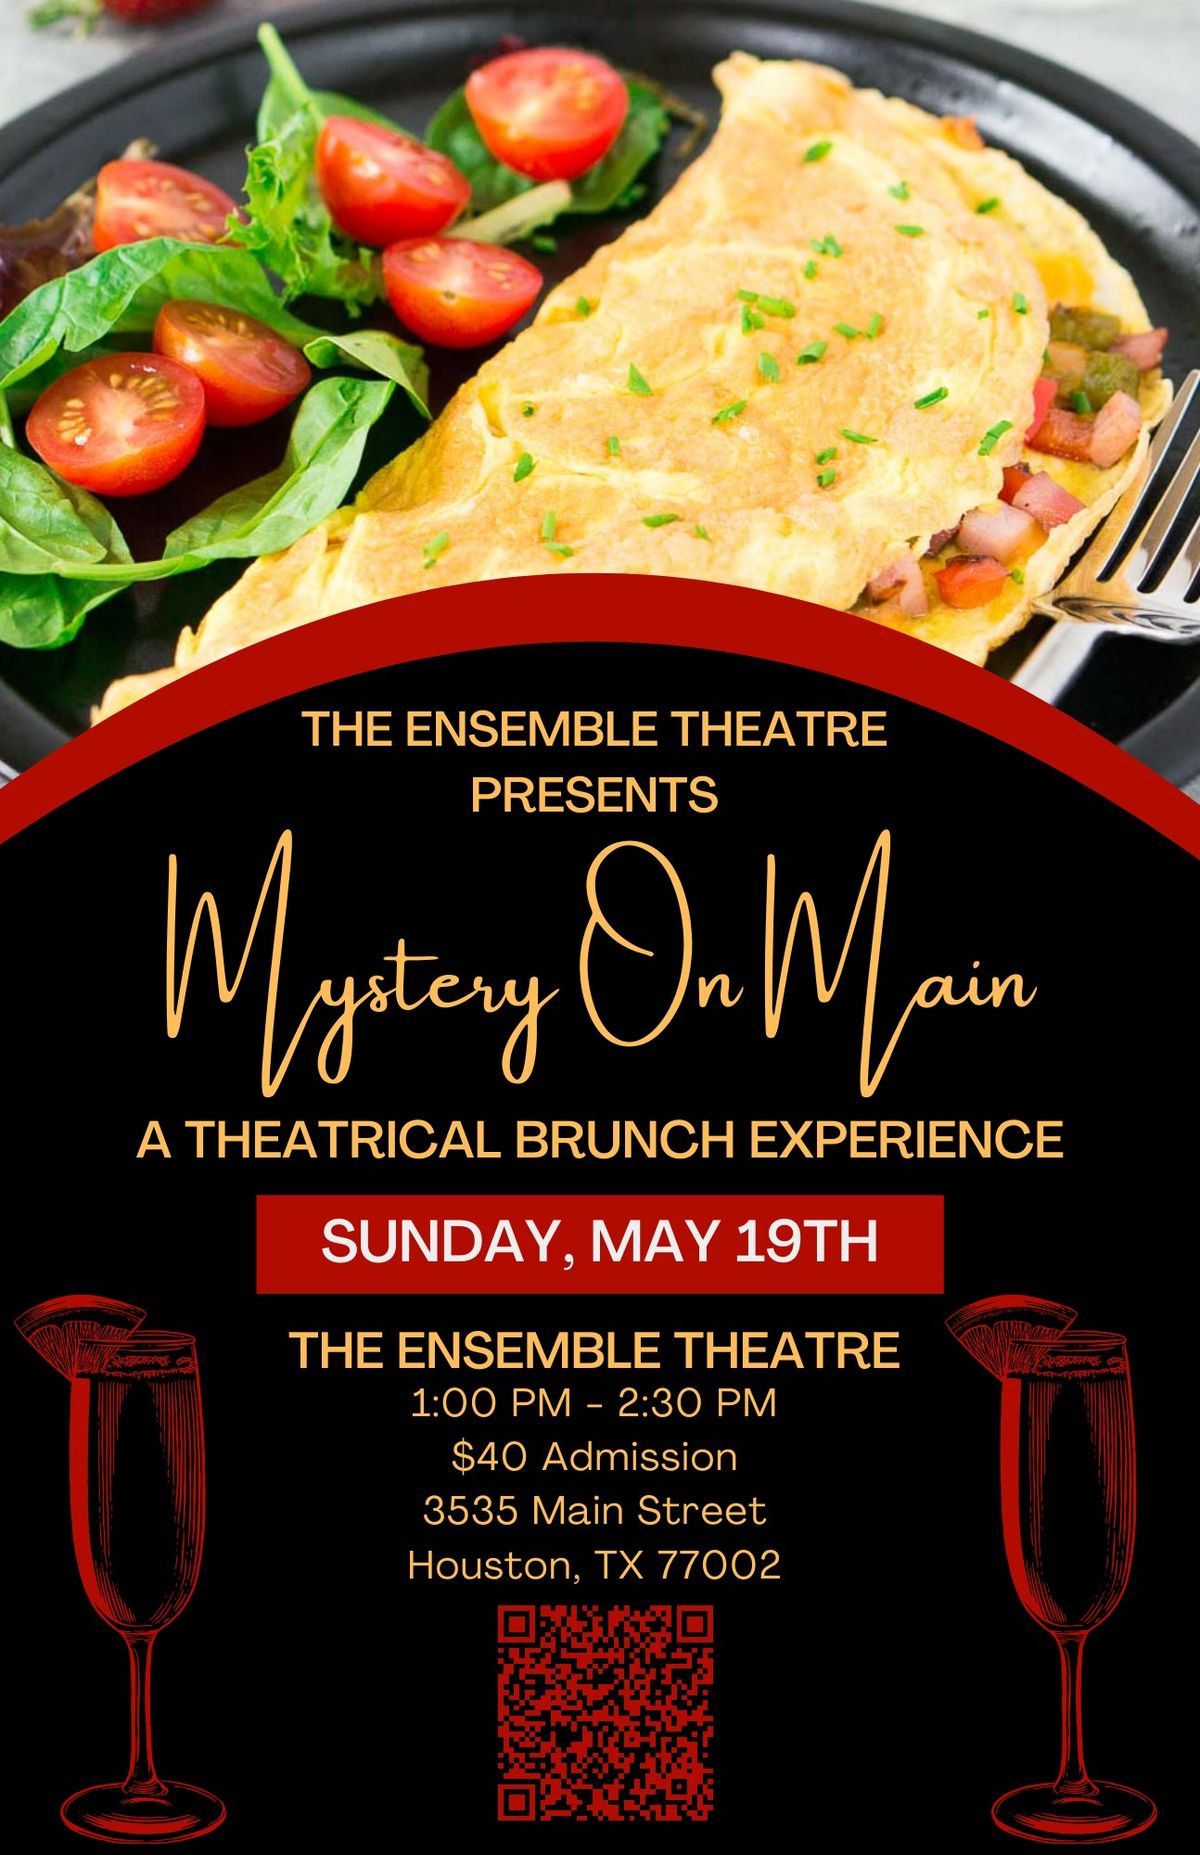 Sunday Funday Brunch at The Ensemble Theatre